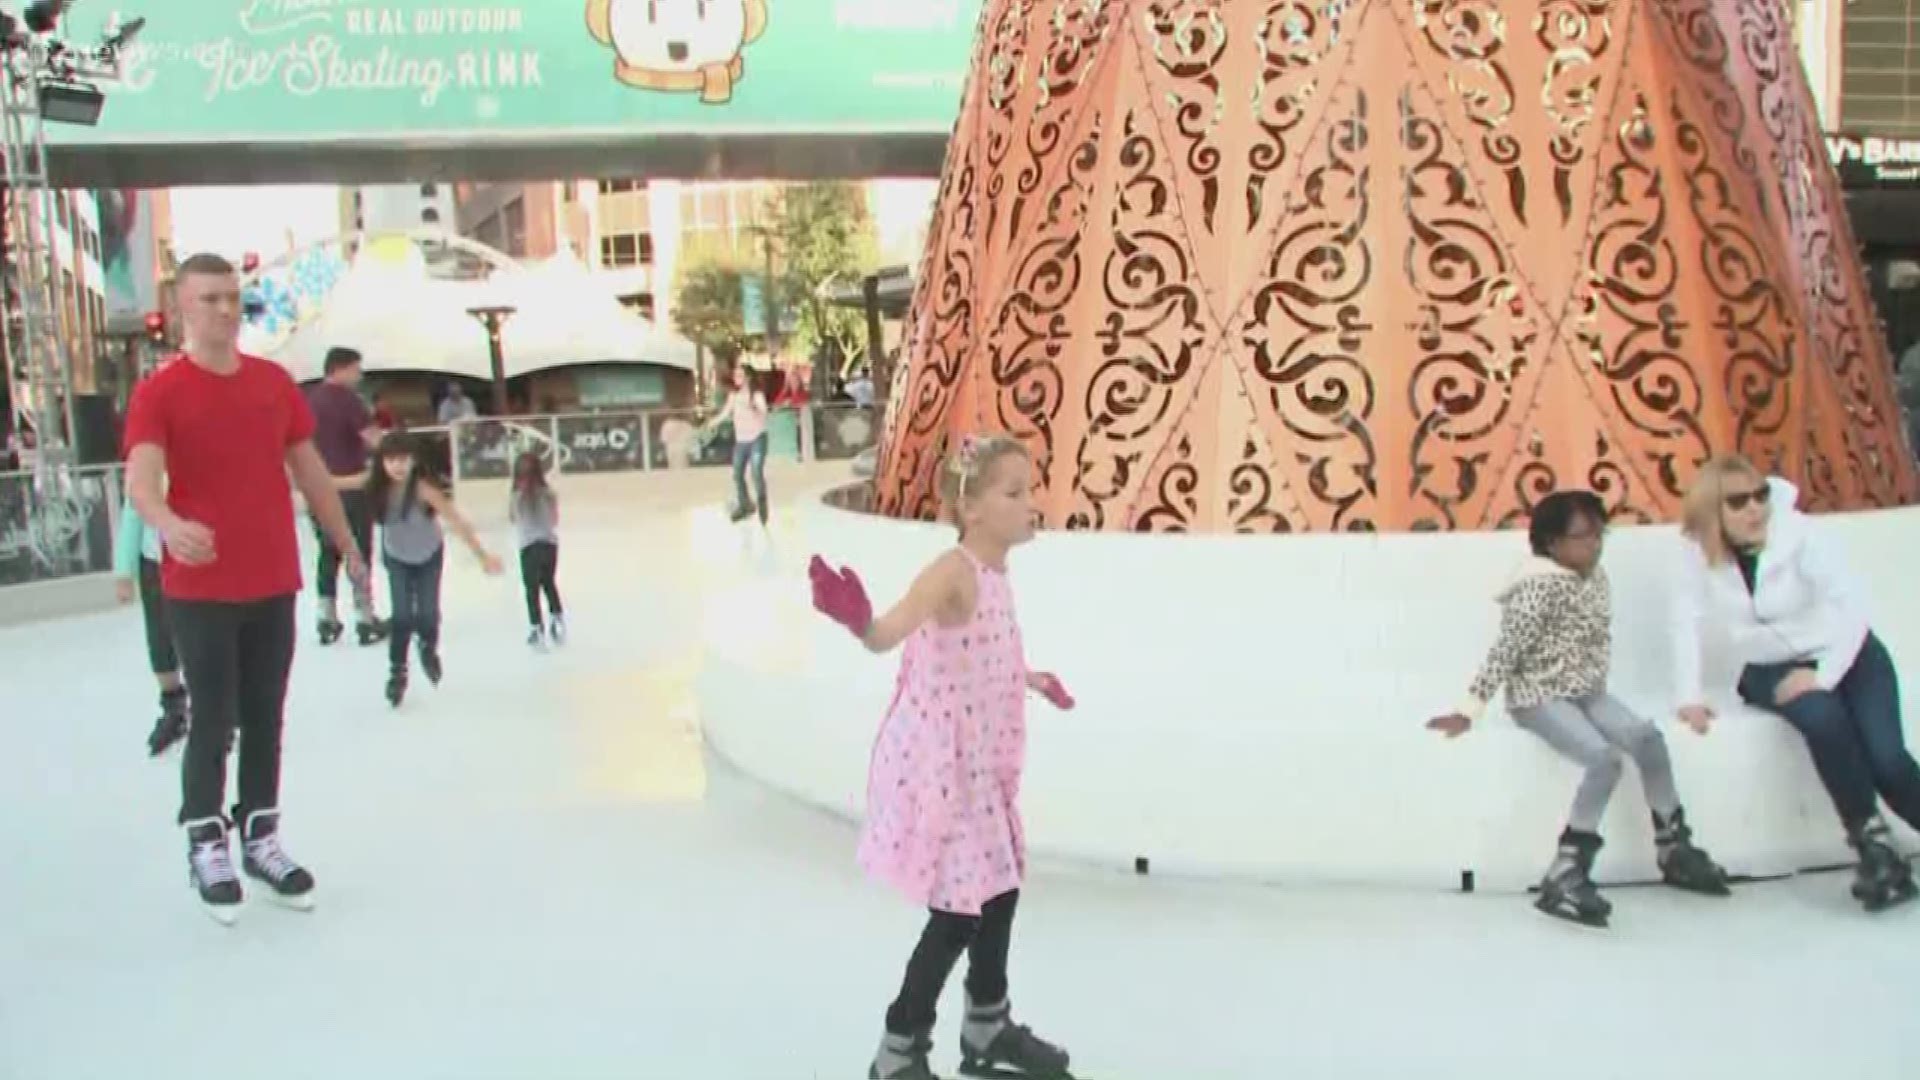 Grand opening of Cityscape ice skating rink | 12news.com